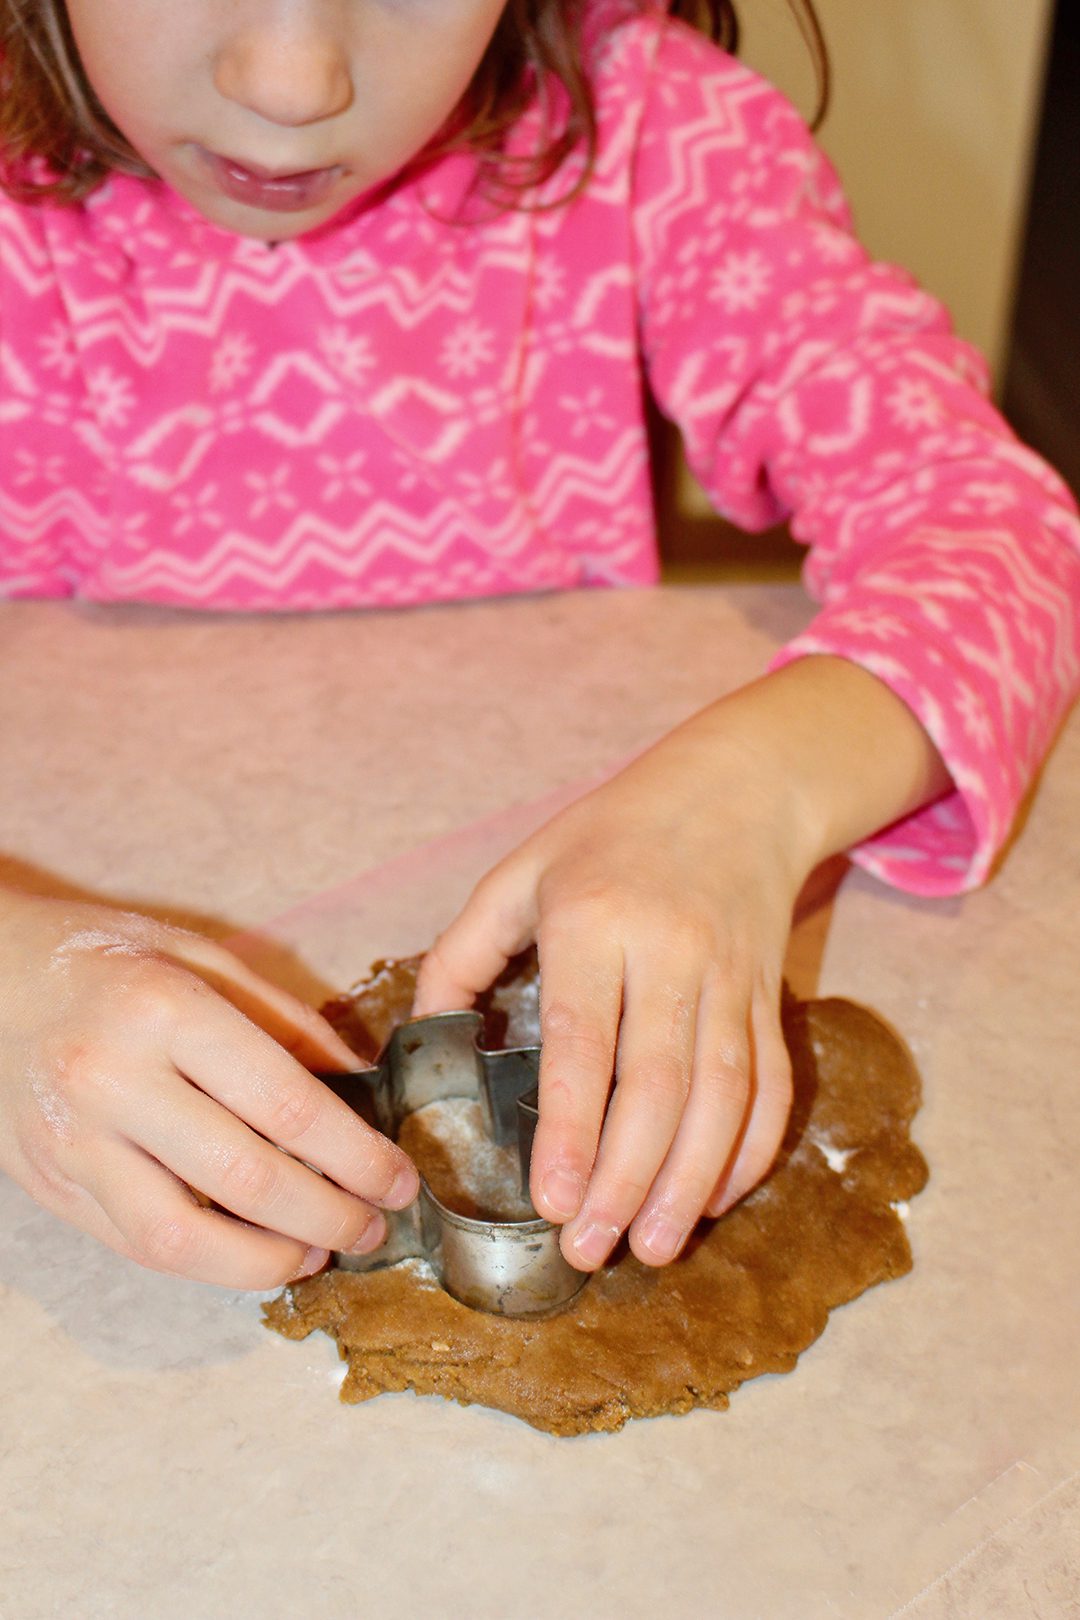 A girl cutting a gingerbread man shape out of some gingerbread cookie dough.